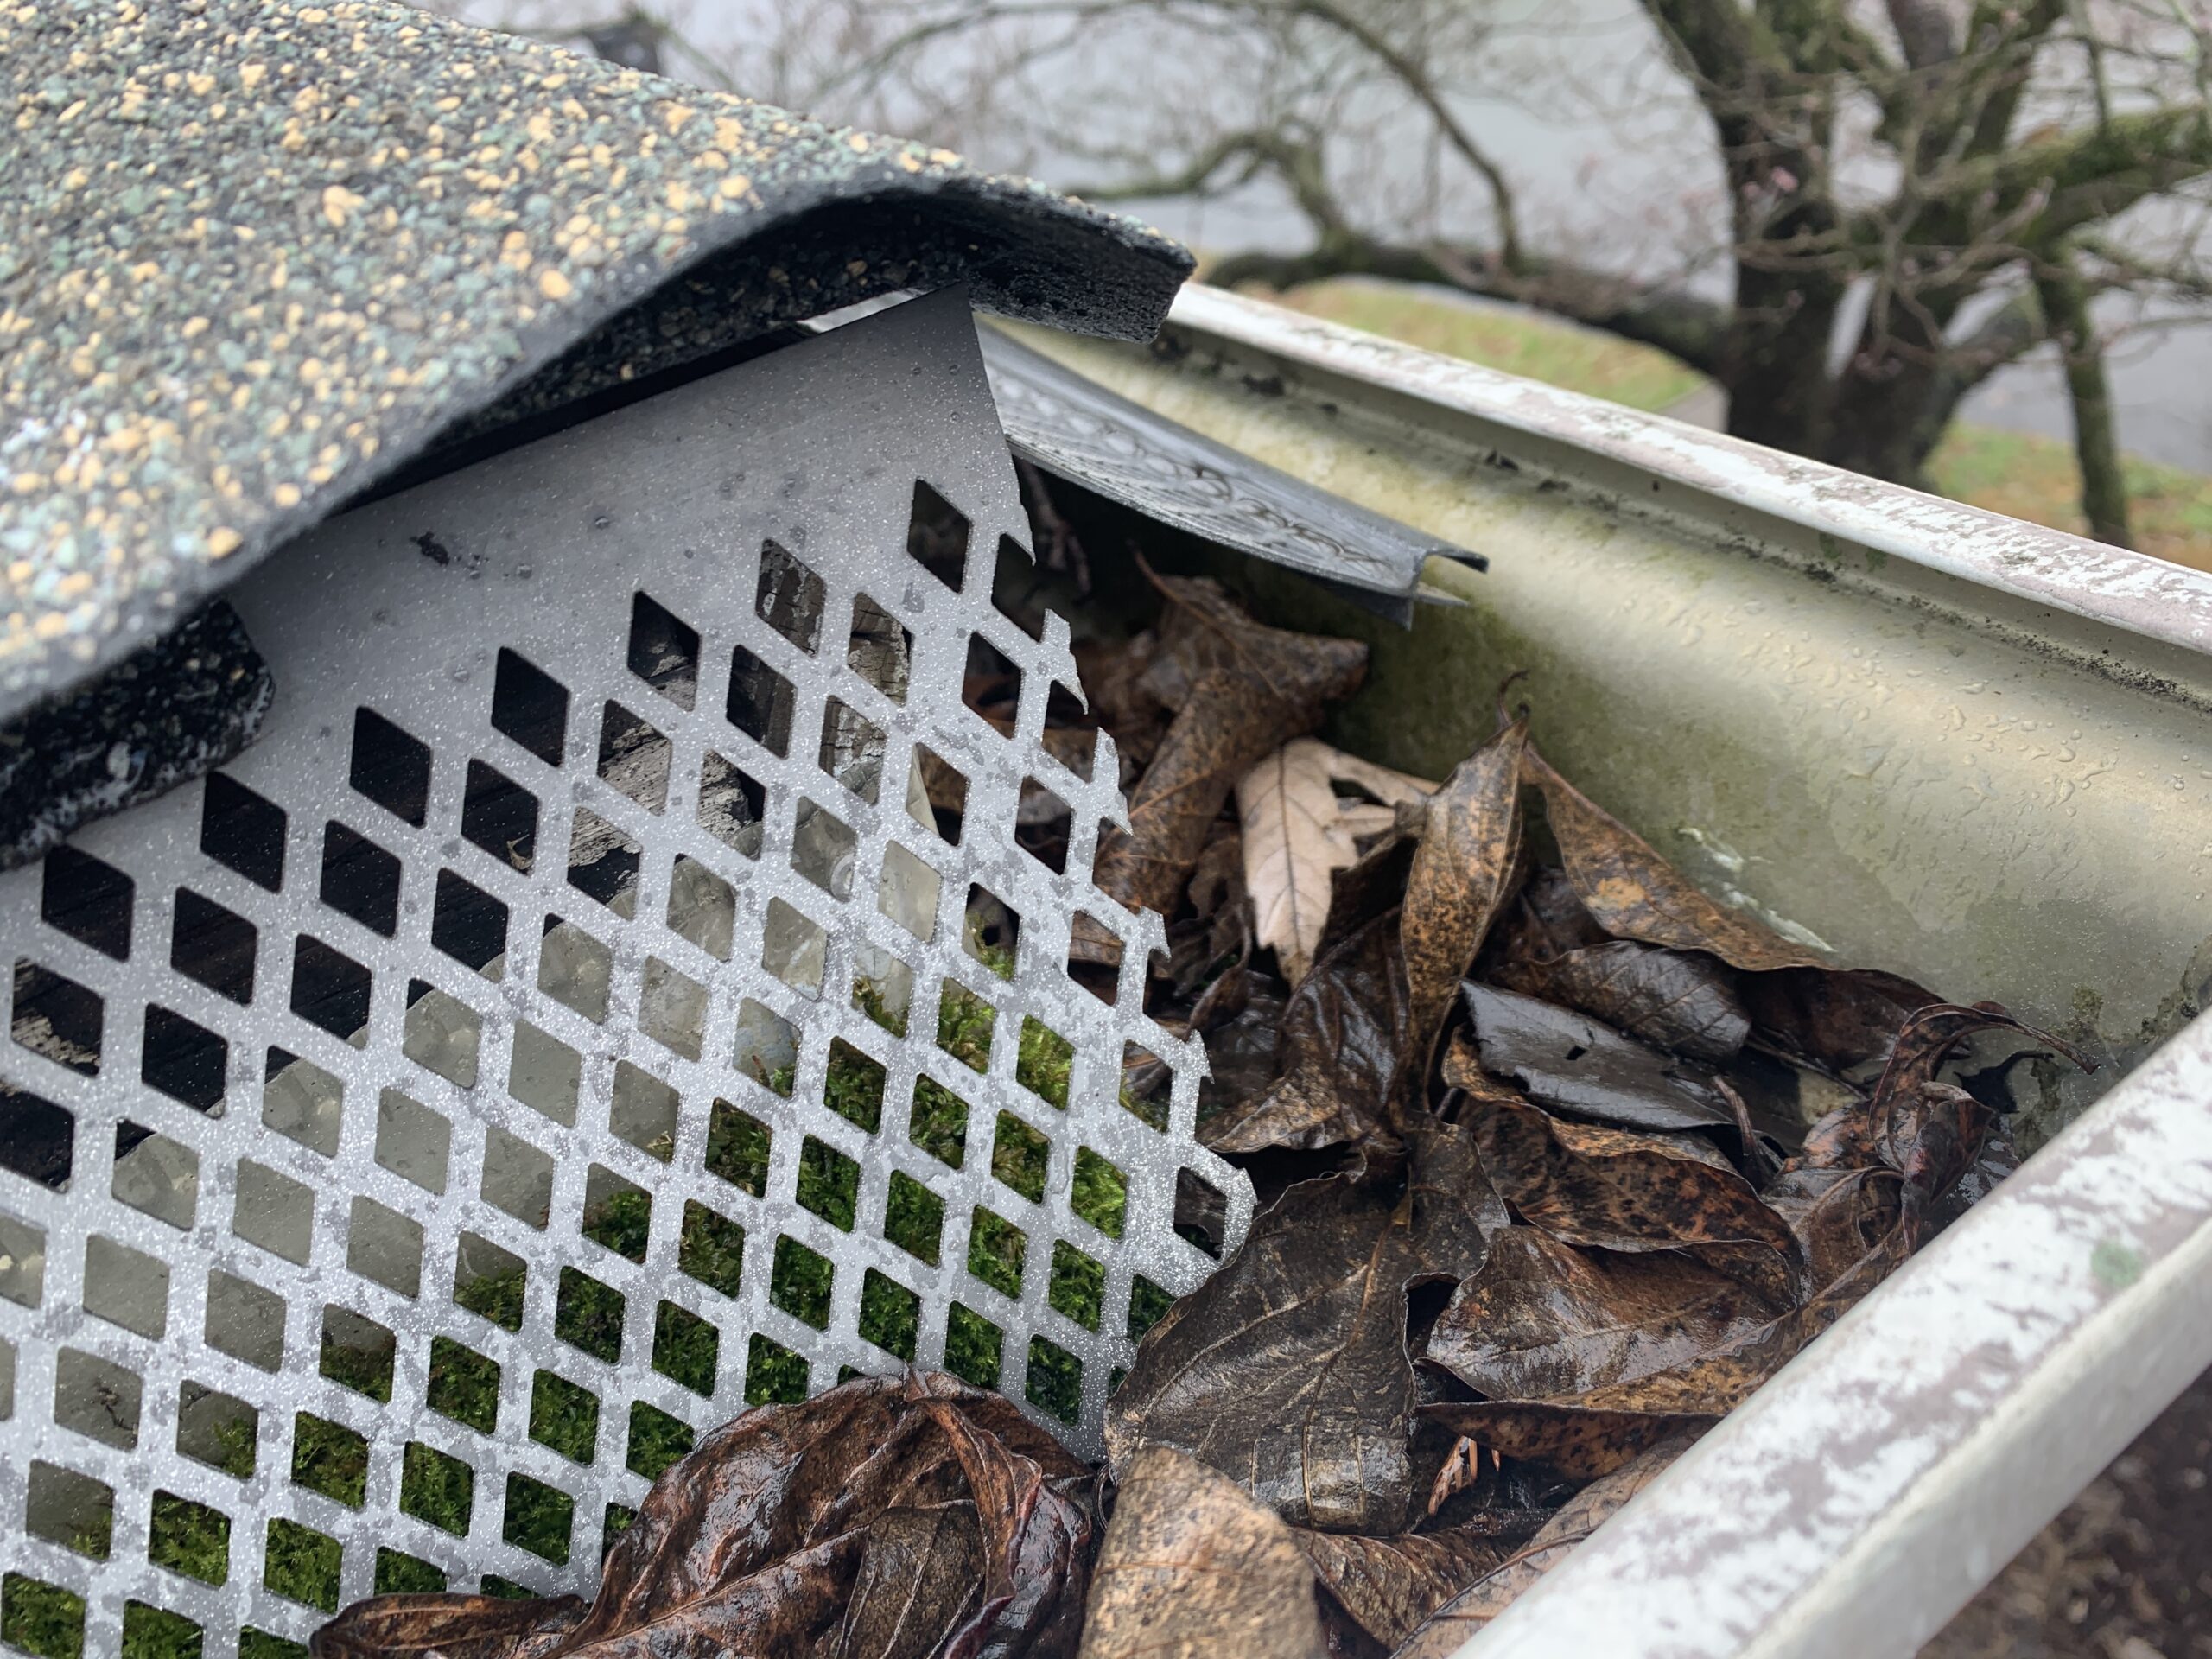 Fall gutters hold extra weight and do not drain properly causing damage to foundations, facia boards eaves and soffits and sometimes even the inside of the structure